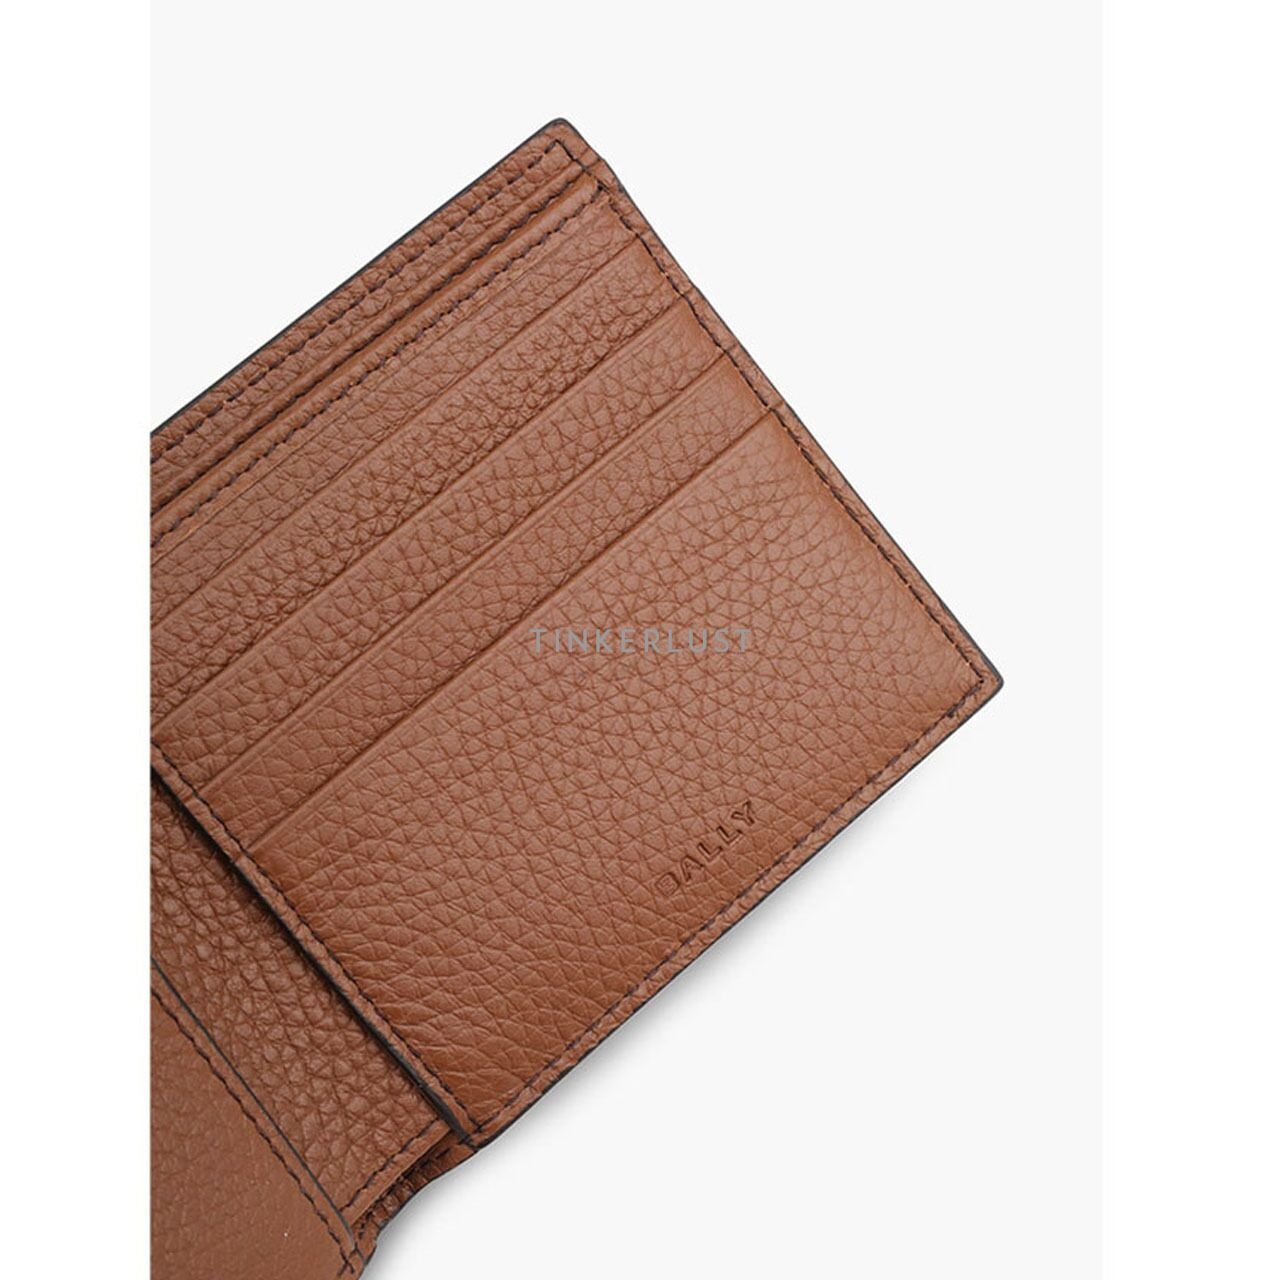 Bally Ribbon Bi-Fold Wallet in Brown Grained Leather with 8 Card Slots Wallet